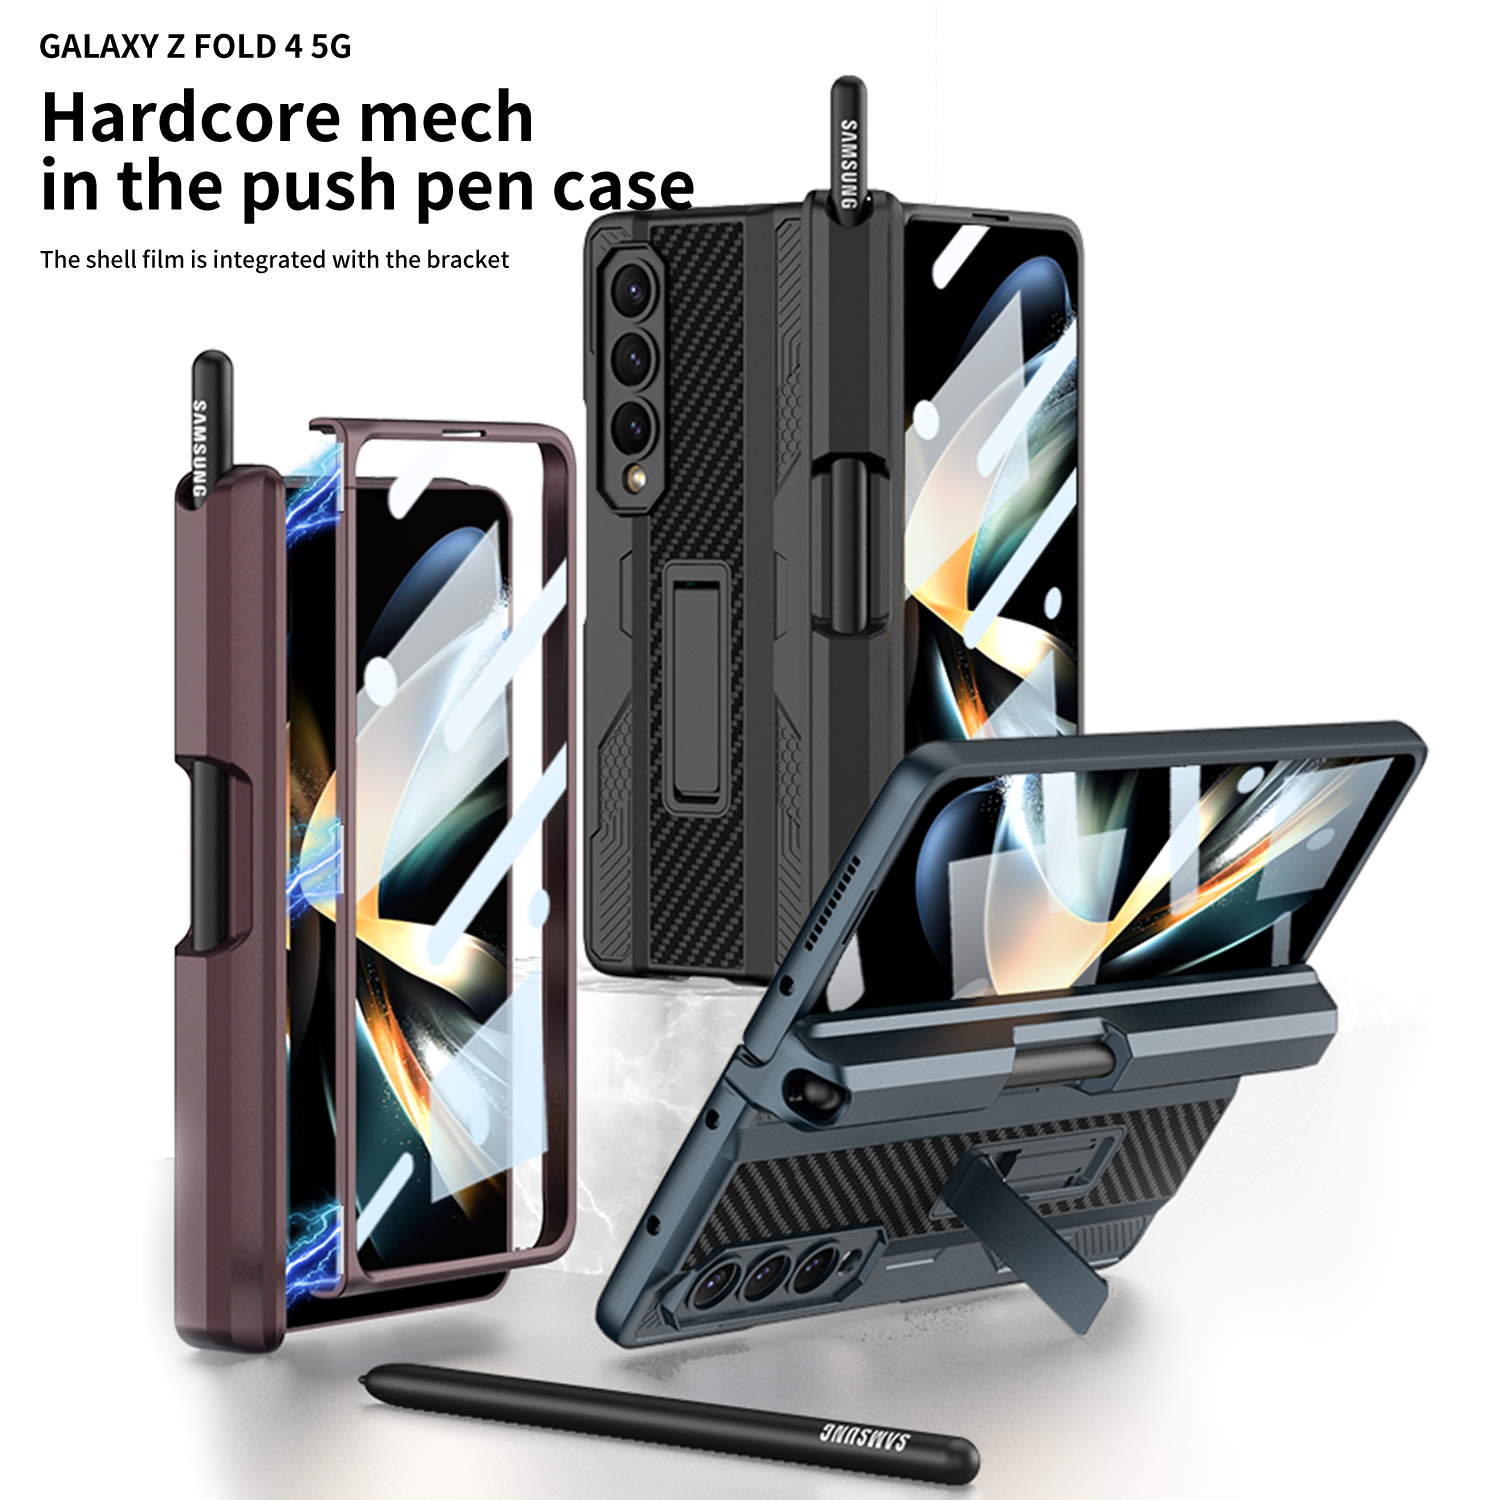 Magnetic Mech Cases For Samsung Galaxy Z Fold 4 Case Glass Film Screen Protector Push Pen Stand Hinge Cover